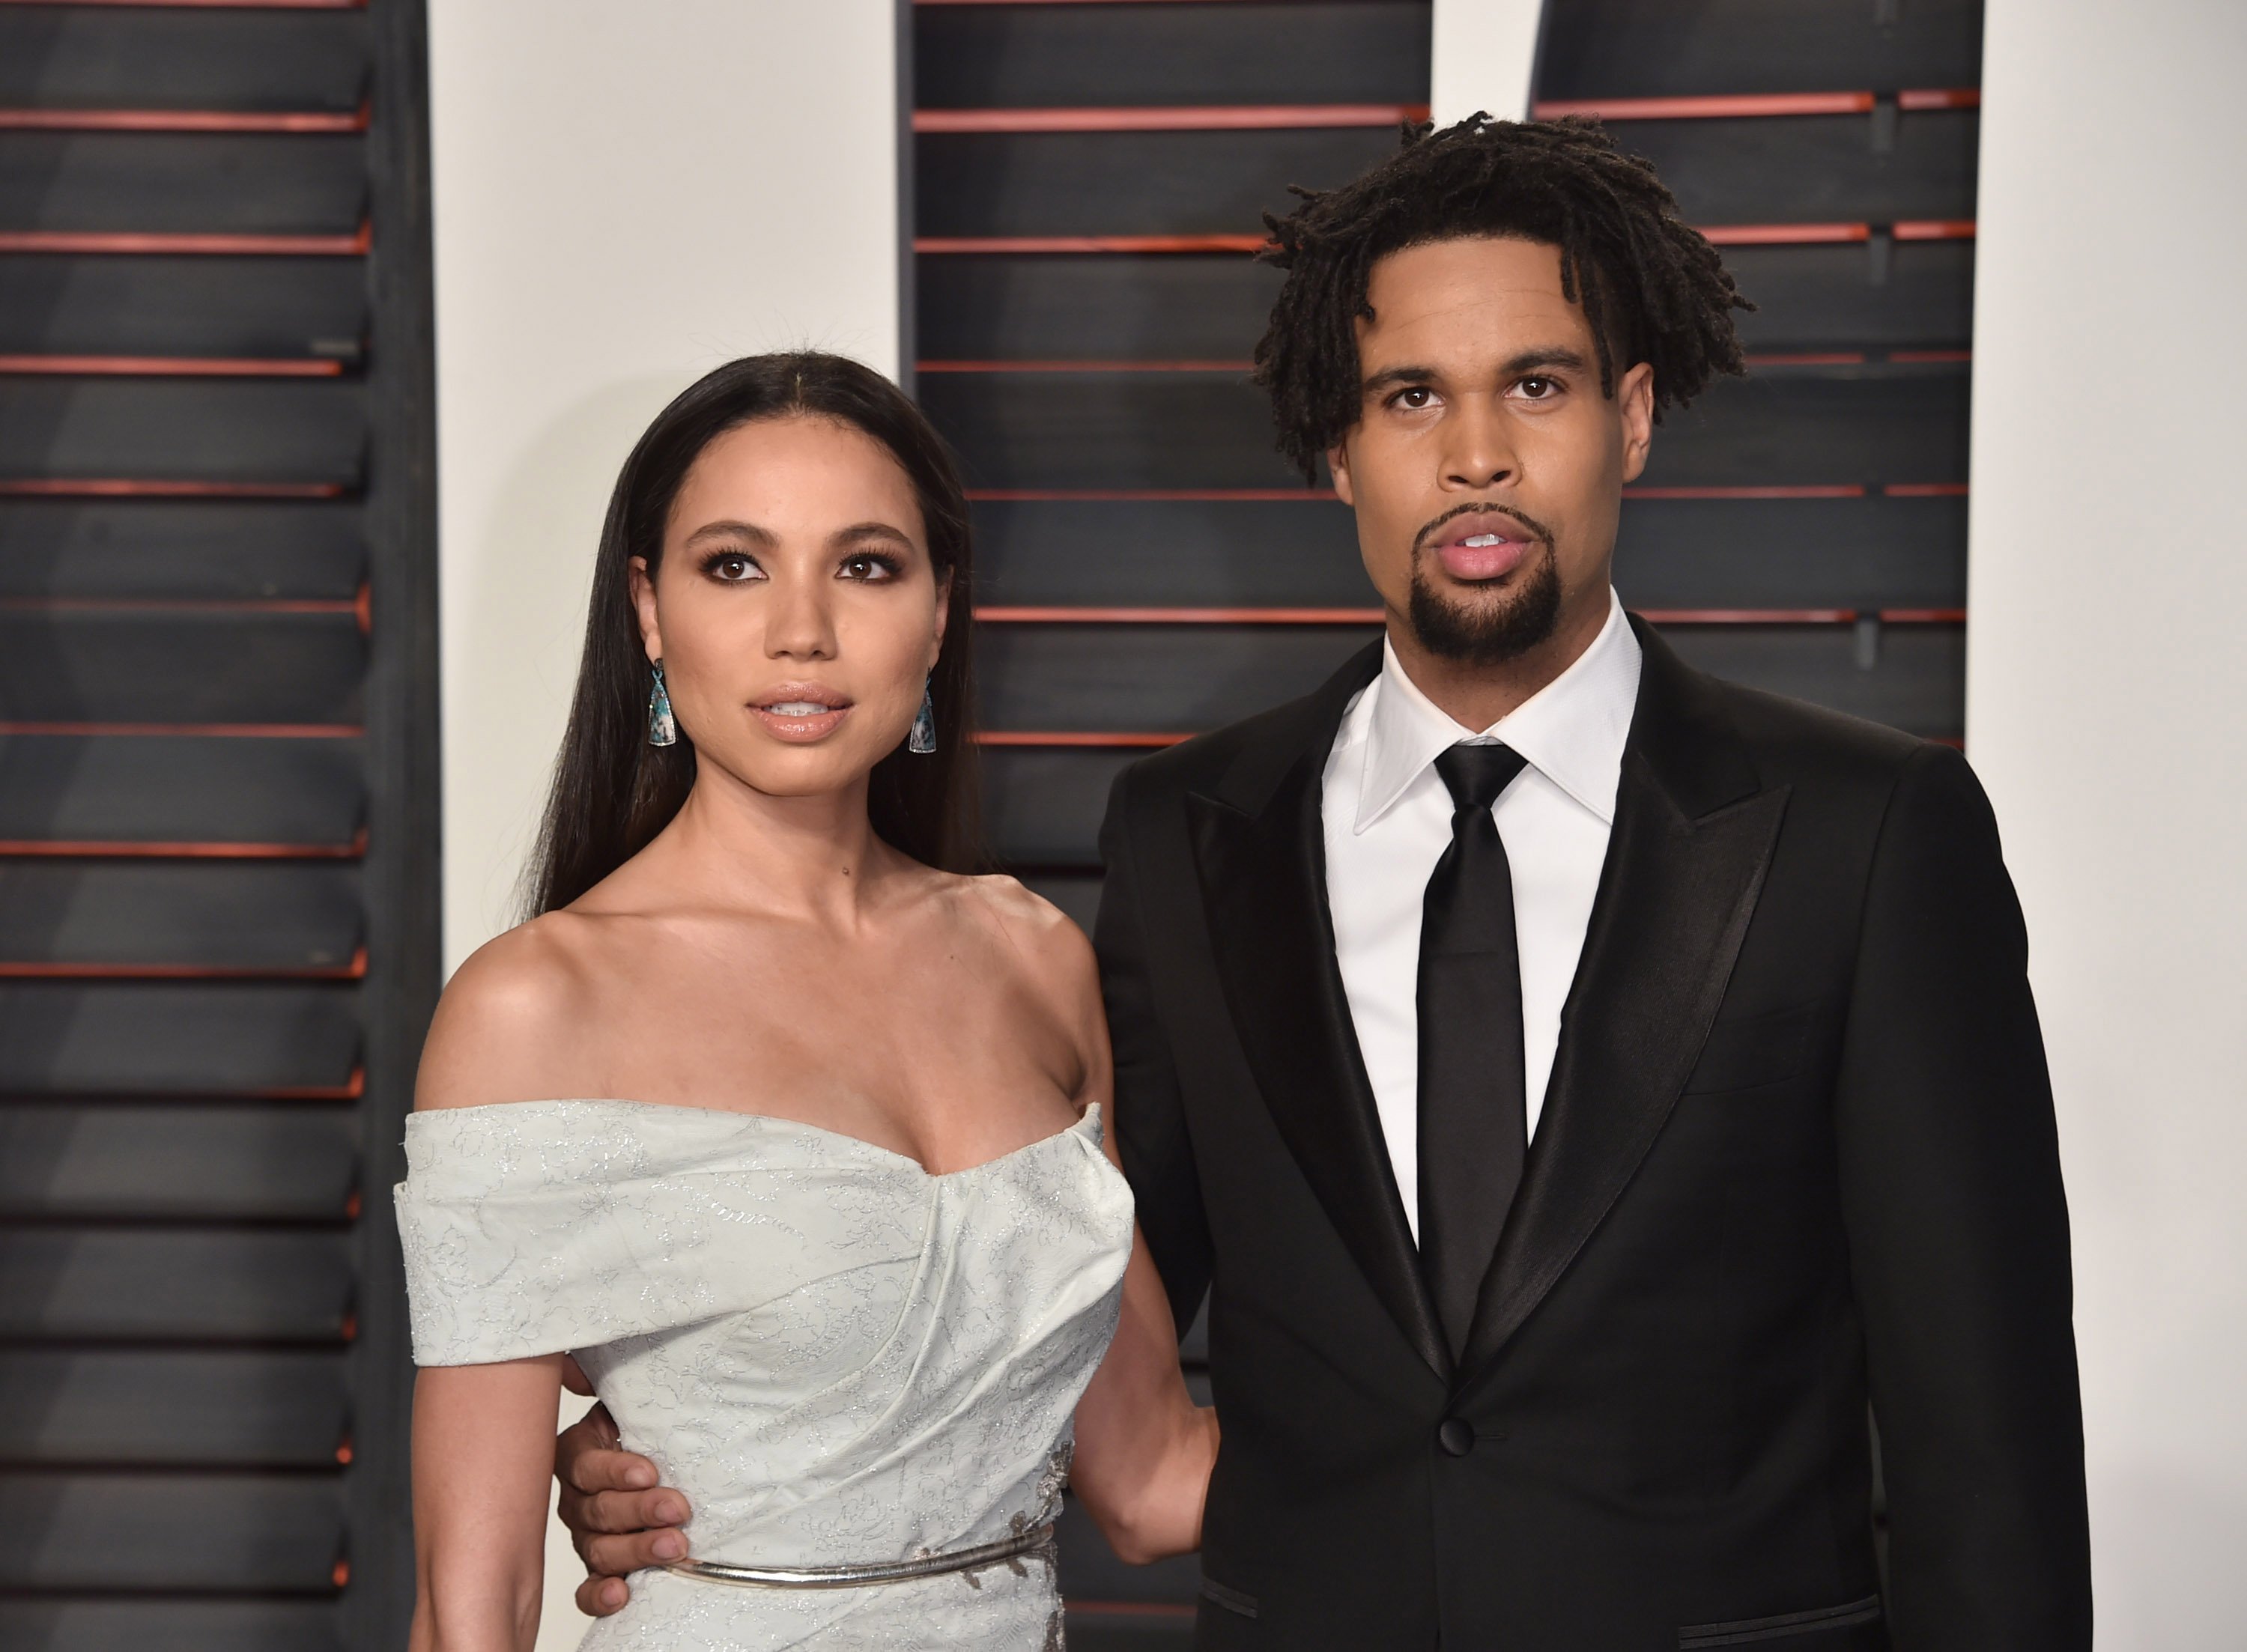 Jurnee Smollett and Josiah Bell attend the 2016 Vanity Fair Oscar Party hosted By Graydon Carter at Wallis Annenberg Center for the Performing Arts in Beverly Hills, California on February 28, 2016 | Source: Getty Images